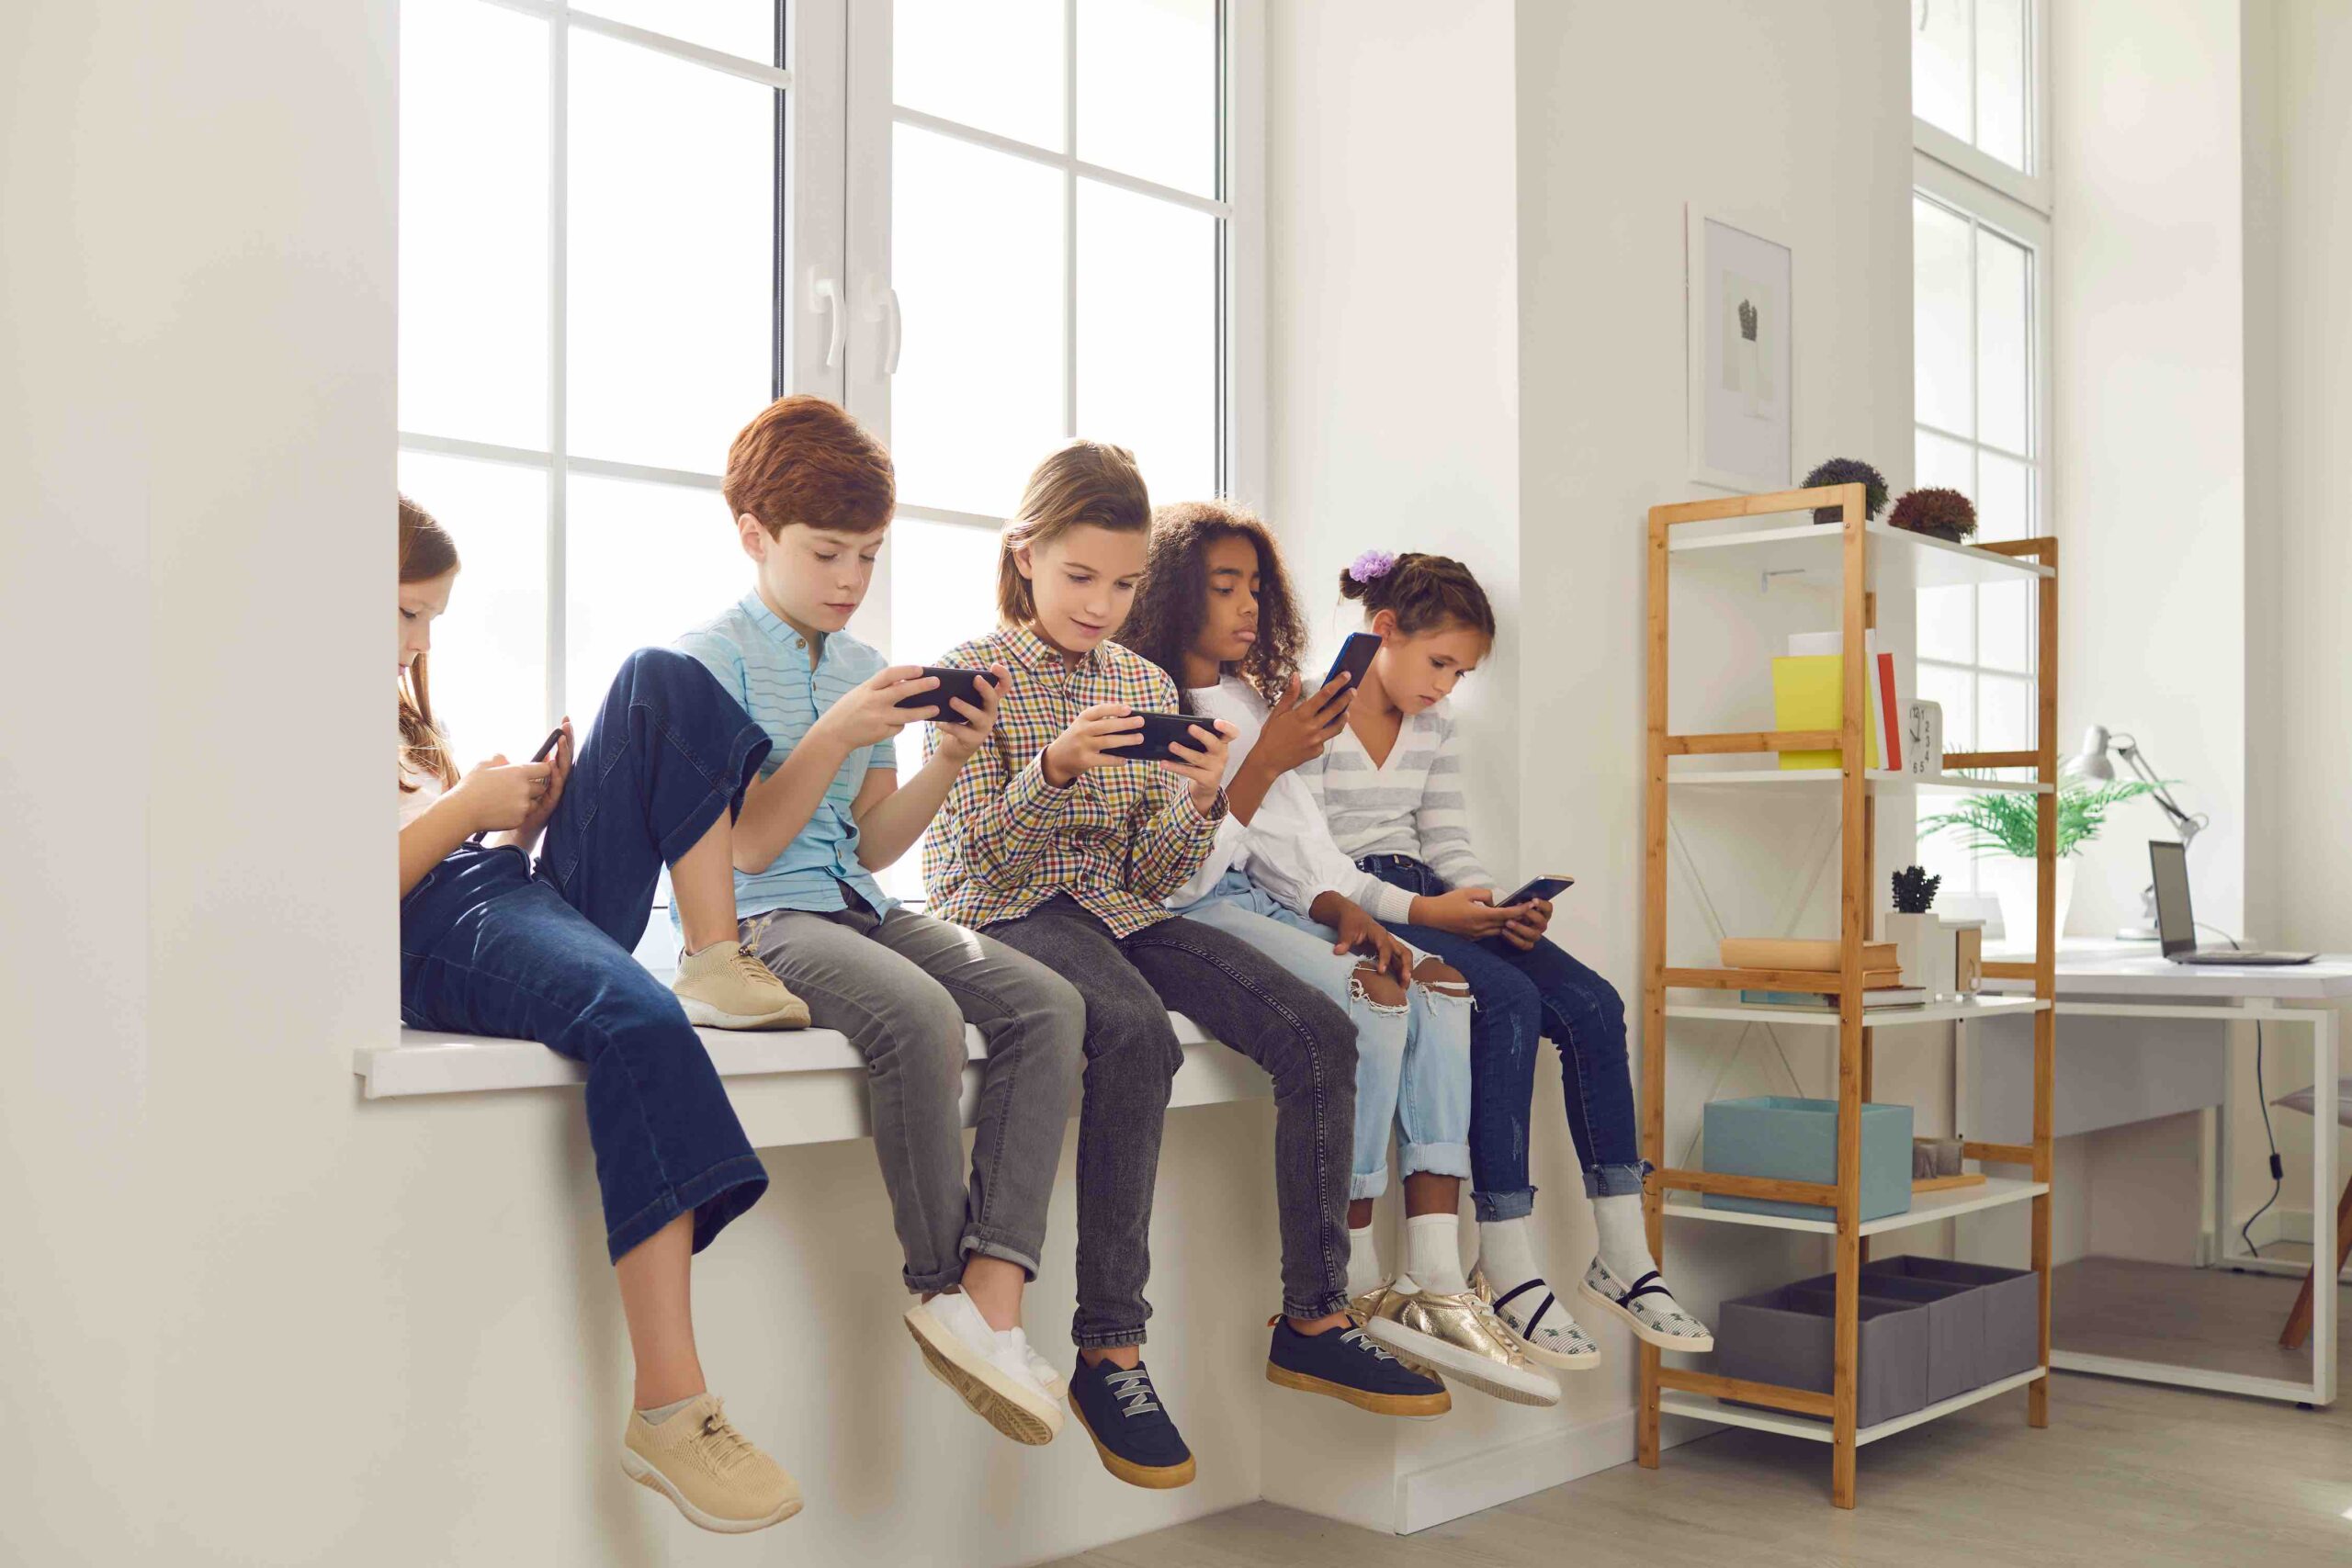 Diverse group of 8-10 year old children sitting on windowsill, playing online phone games and ignoring each other. Concept of gadget addiction and excessive use of social media and mobile devices